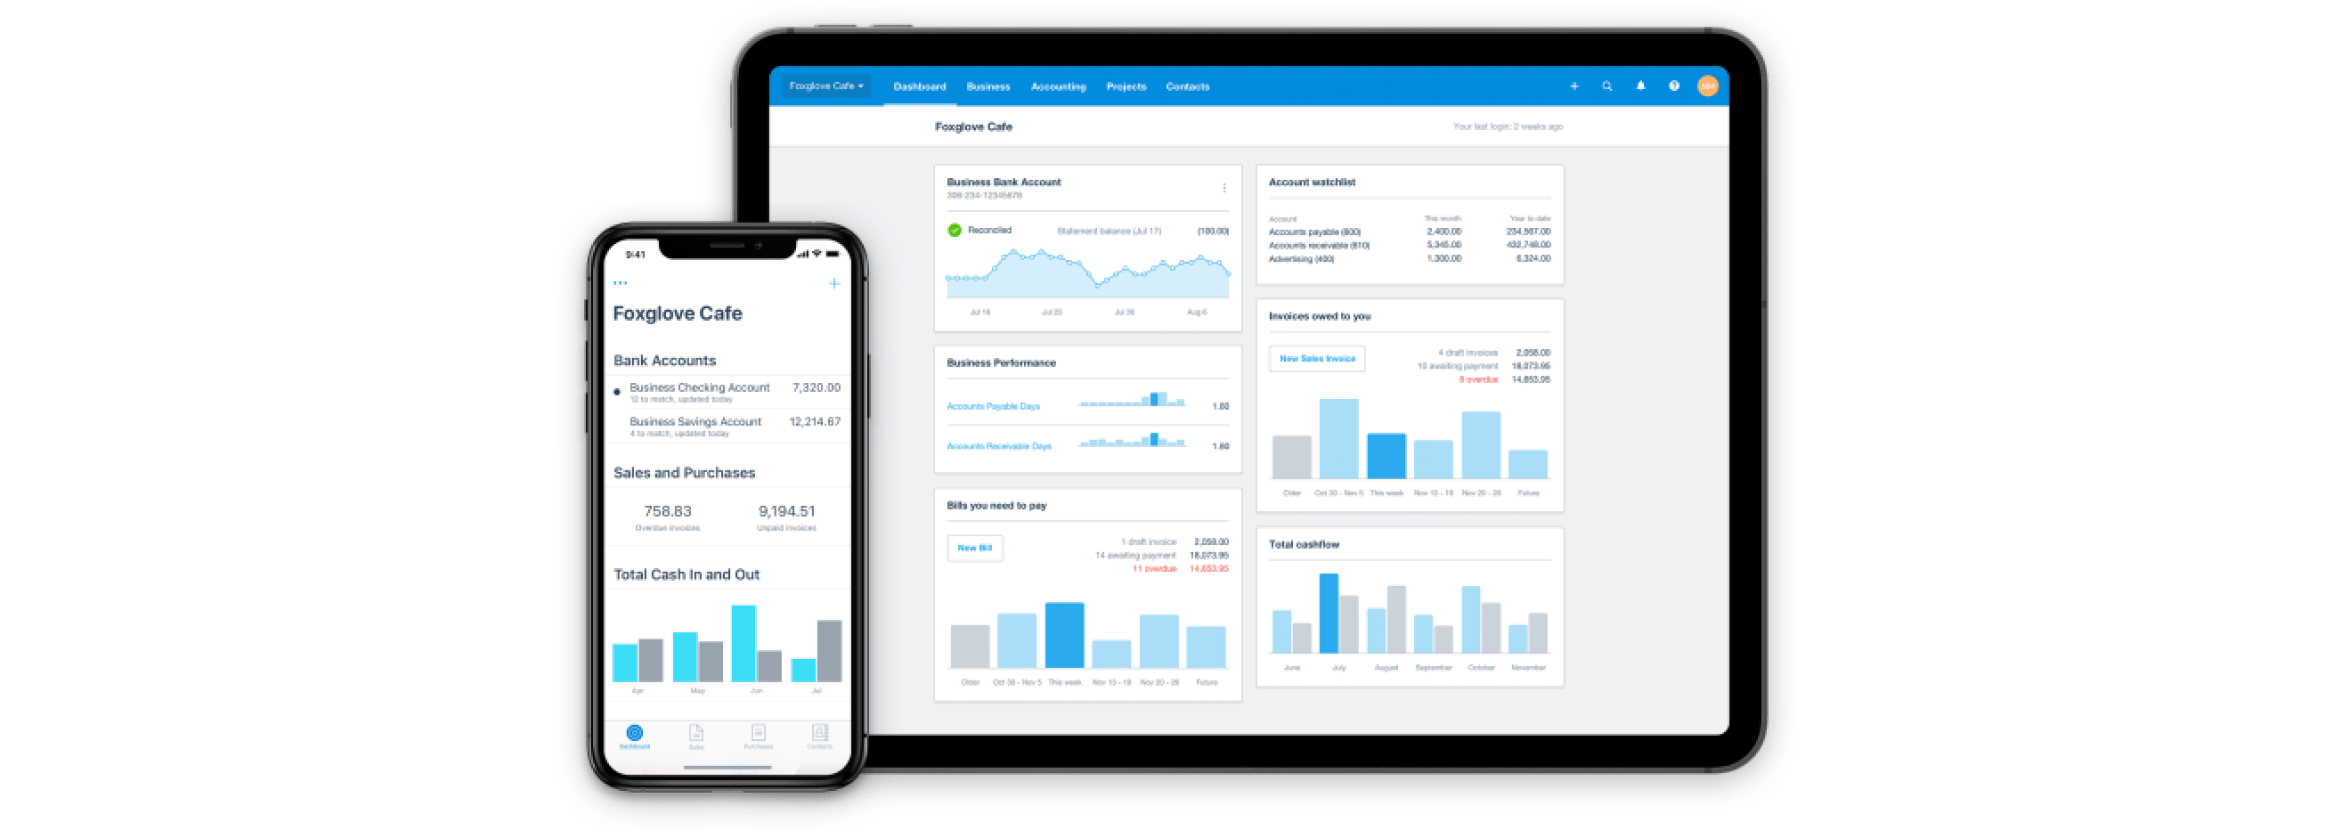 A phone and a tablet show overviews of the accounts and finances for a small business on the Xero dashboard.